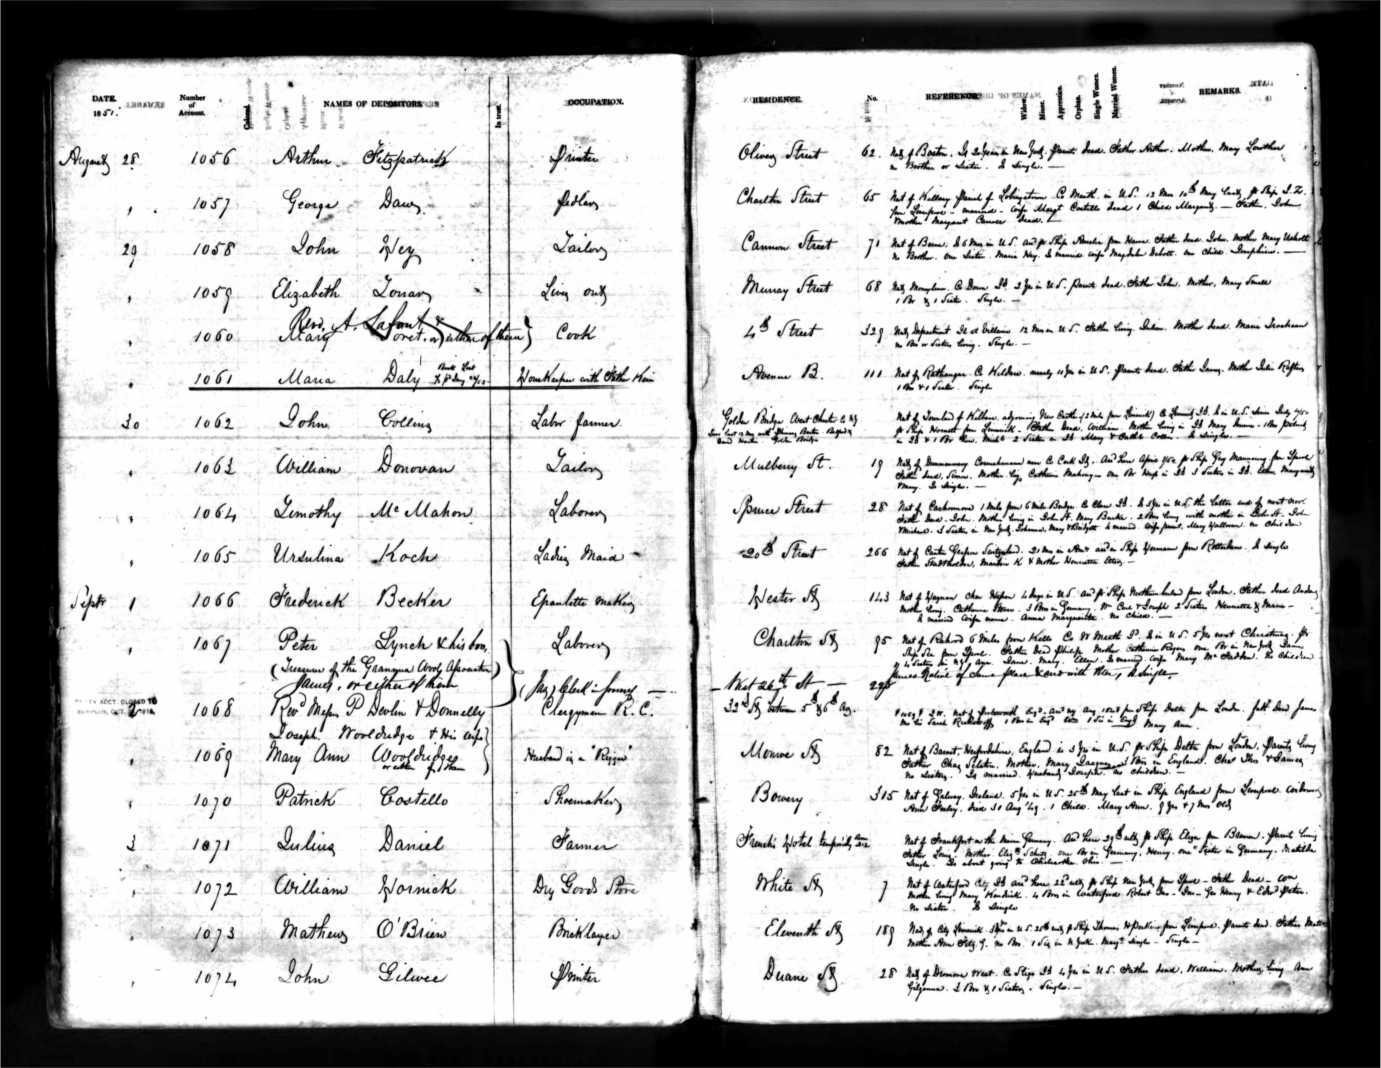 A ledger from the Emigrant Savings Bank. Digitizing the accounts was a monumental task that involved transcribing thousands of handwritten records. Image courtesy of *Beyond “Rags to Riches”*.